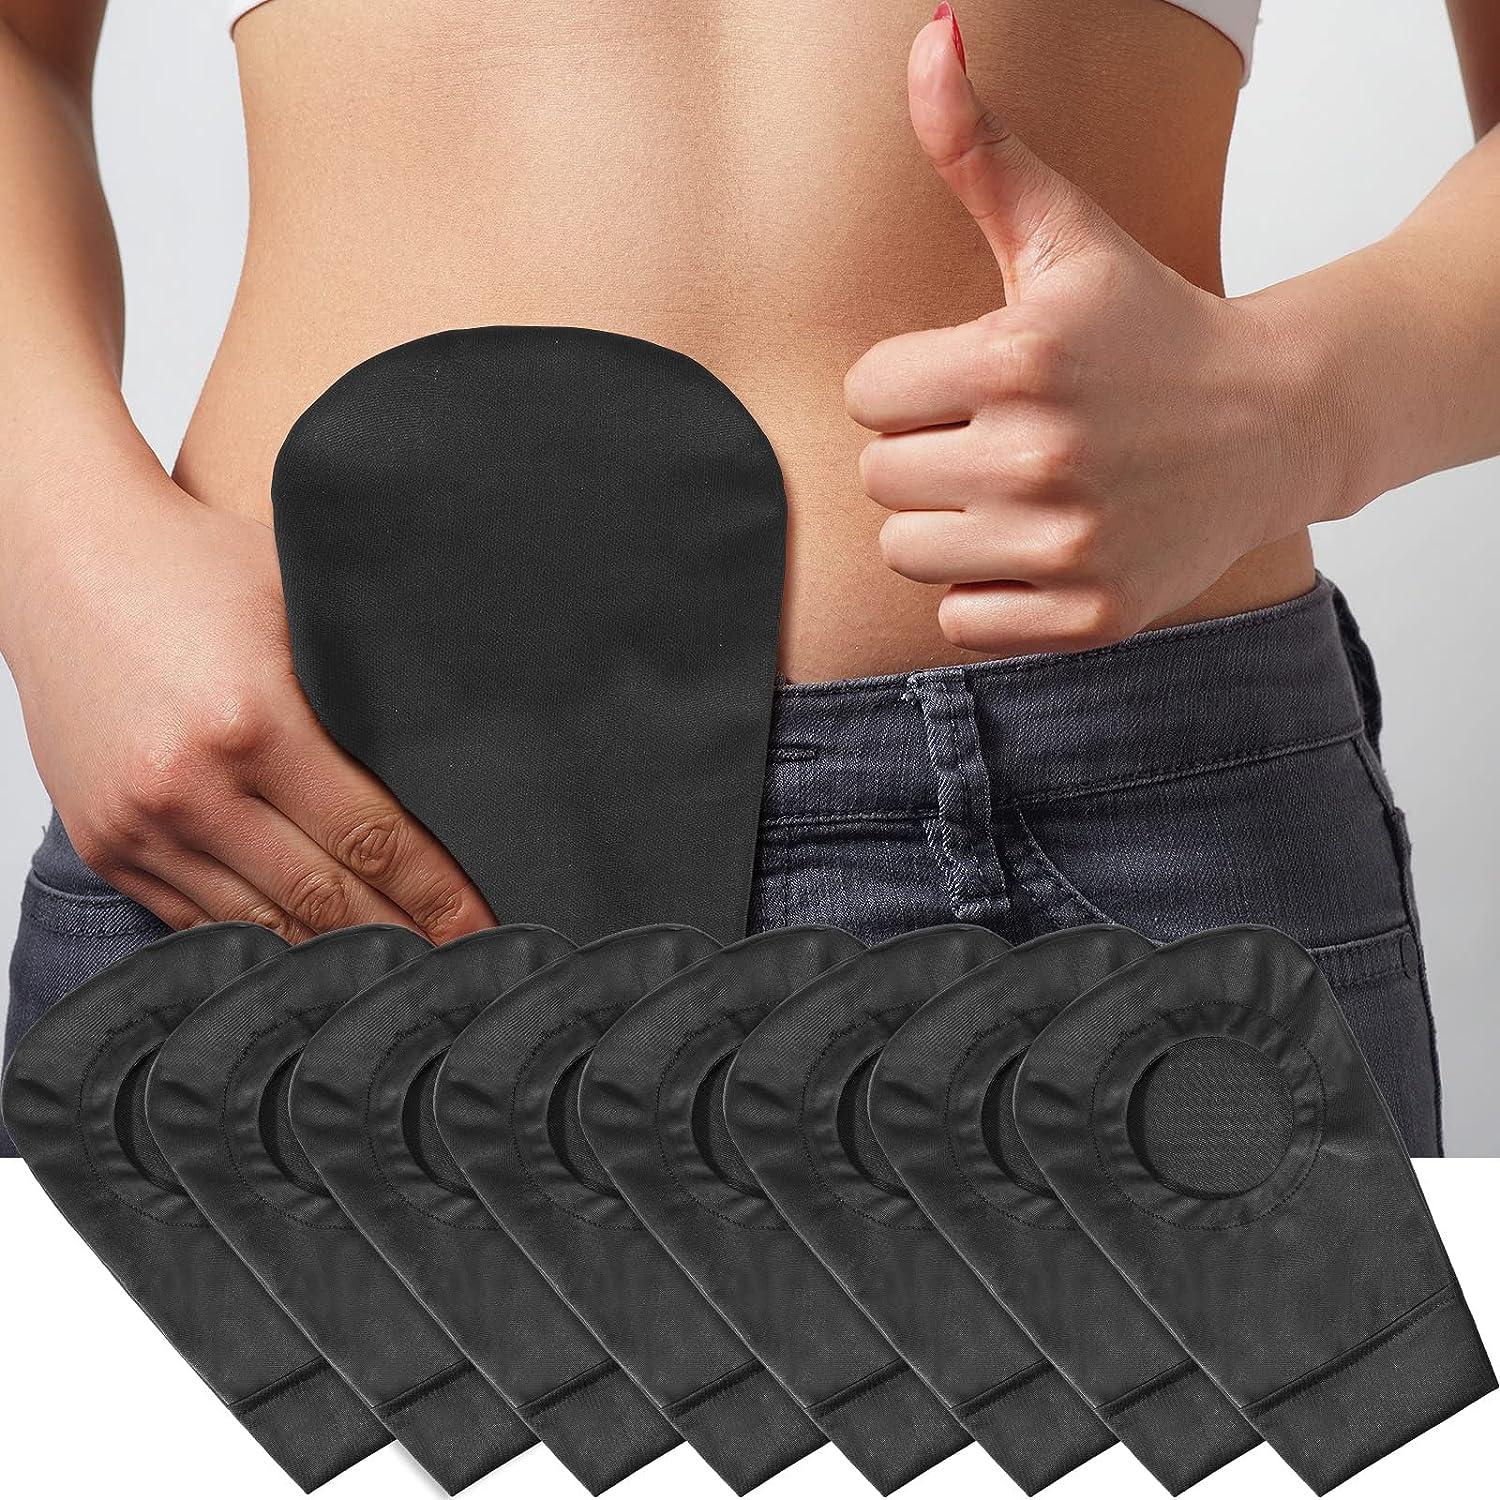 Stoma Bag Covers, Stretchy Colostomy Bag Cover Lightweight Skin Friedn –